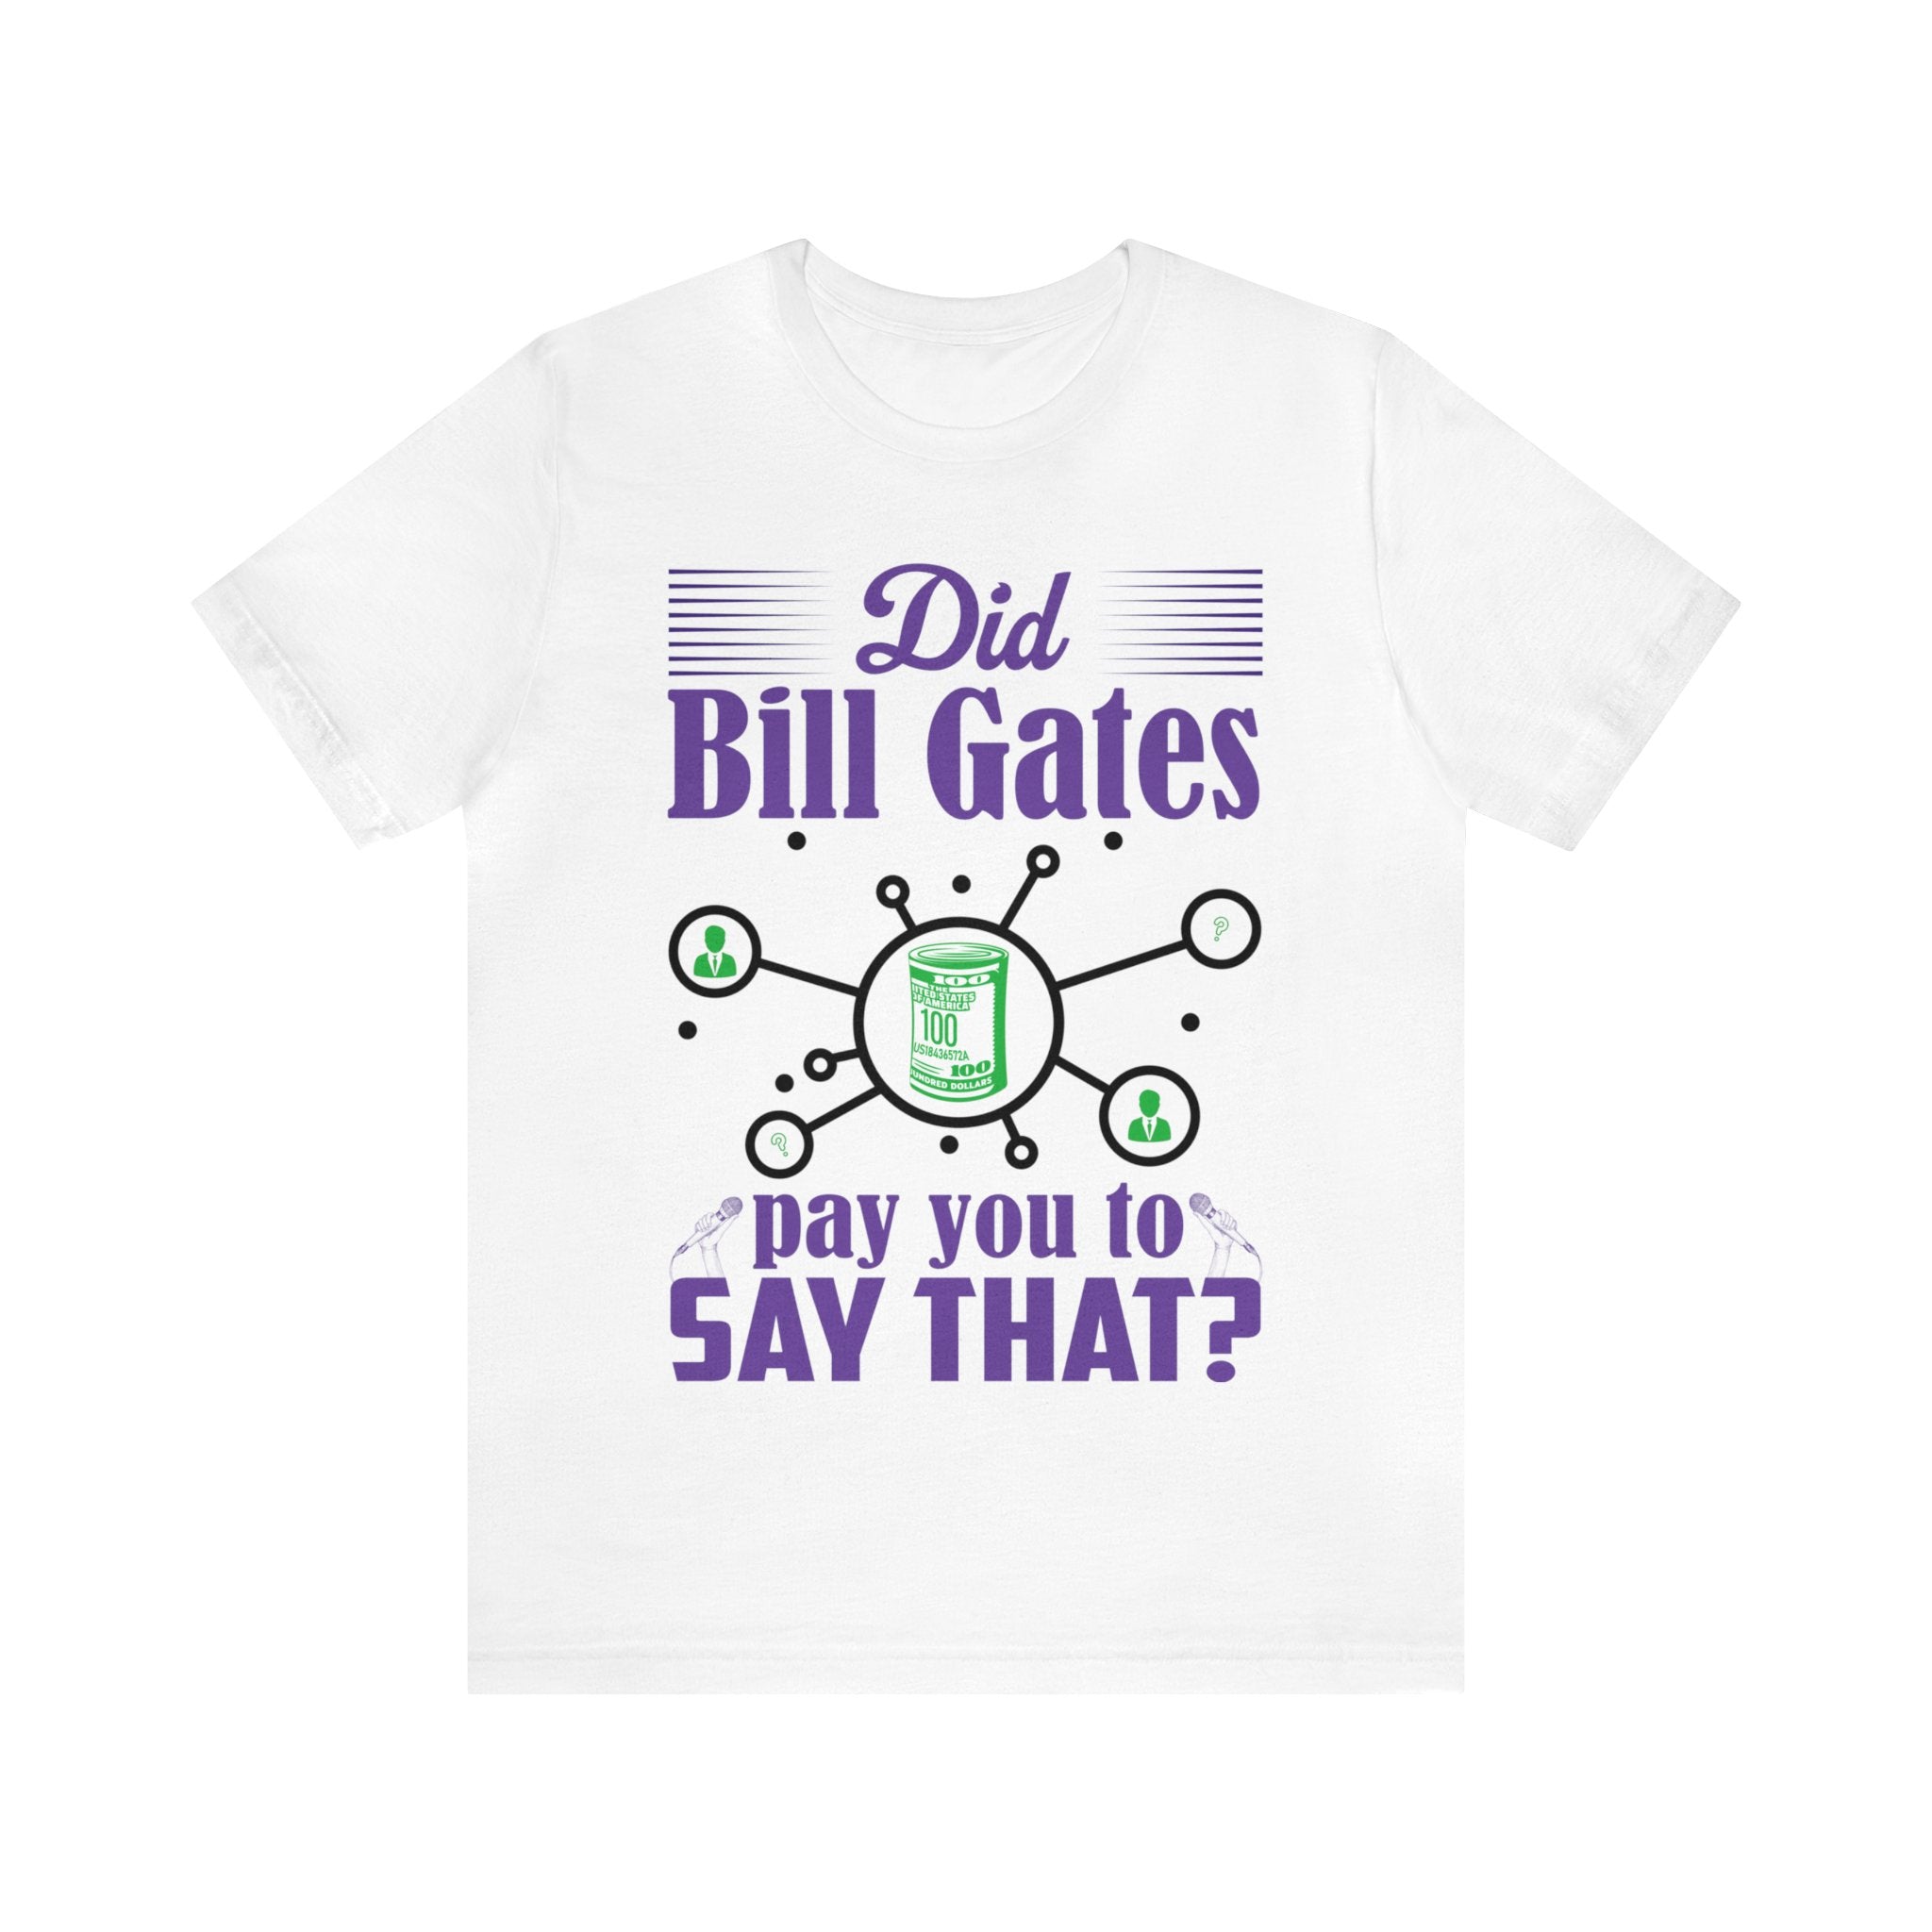 Did Bill Gates Pay You to Say That?